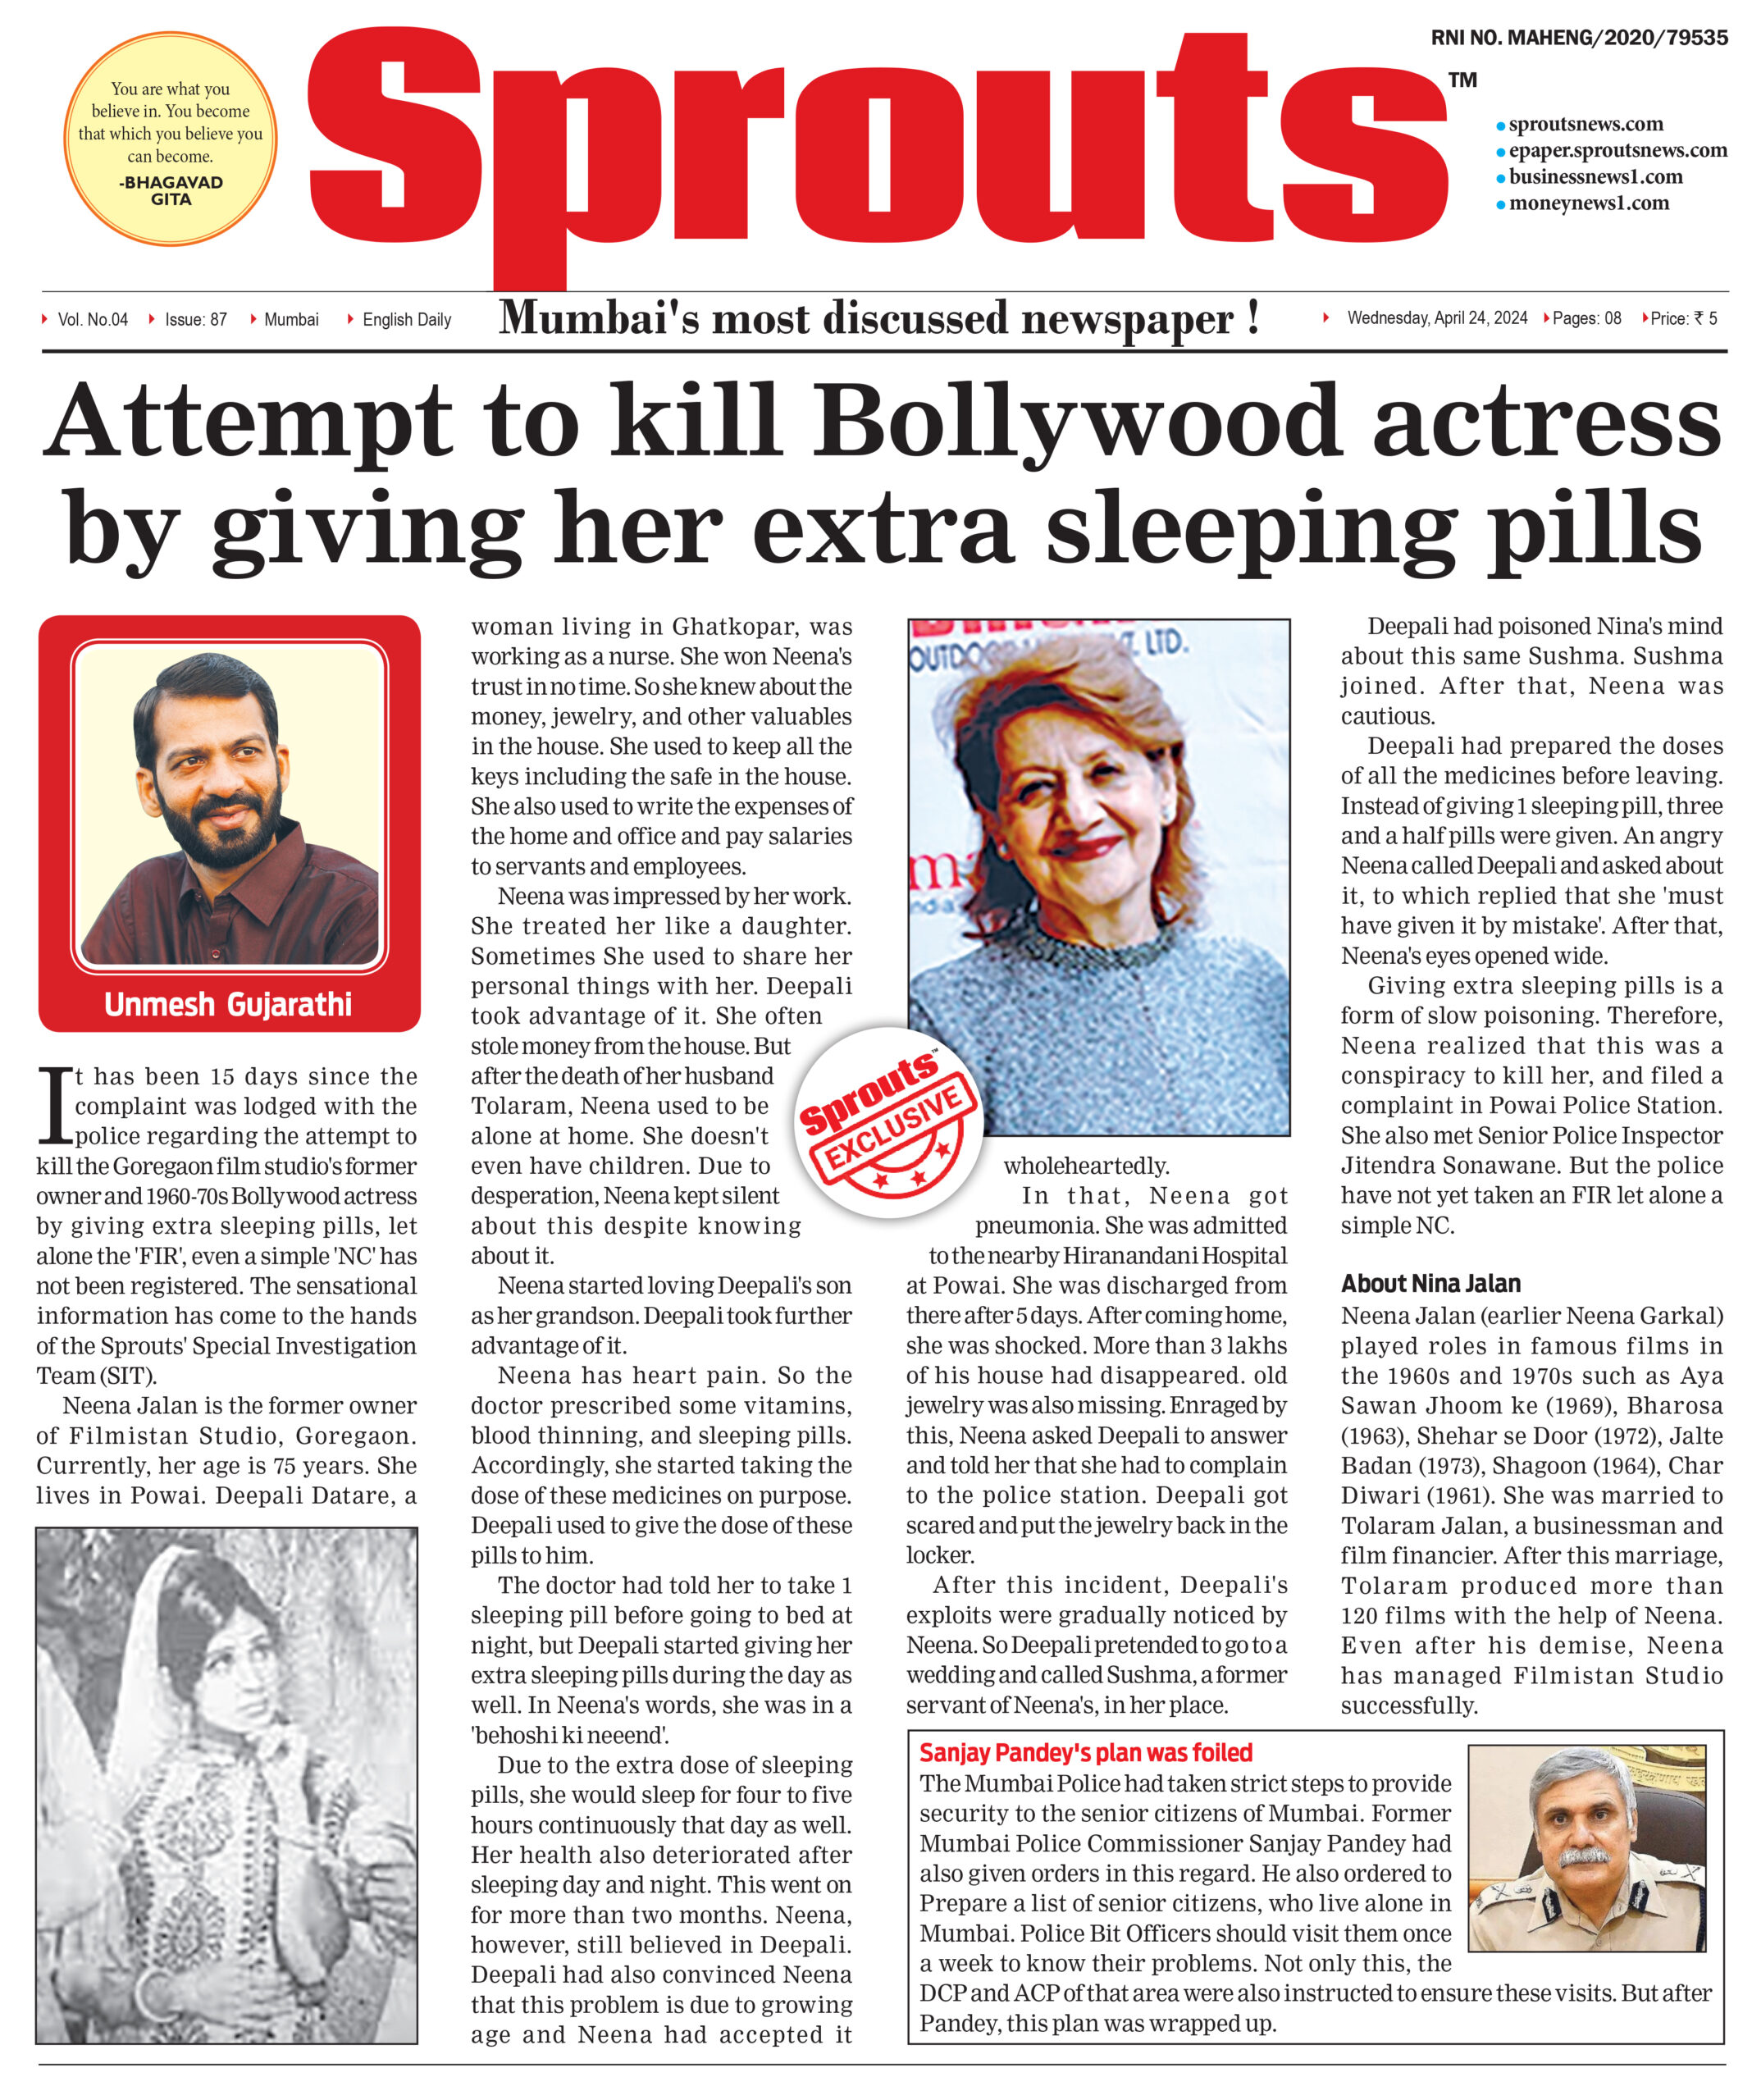 Attempt to kill a Bollywood actress by giving her extra sleeping pills